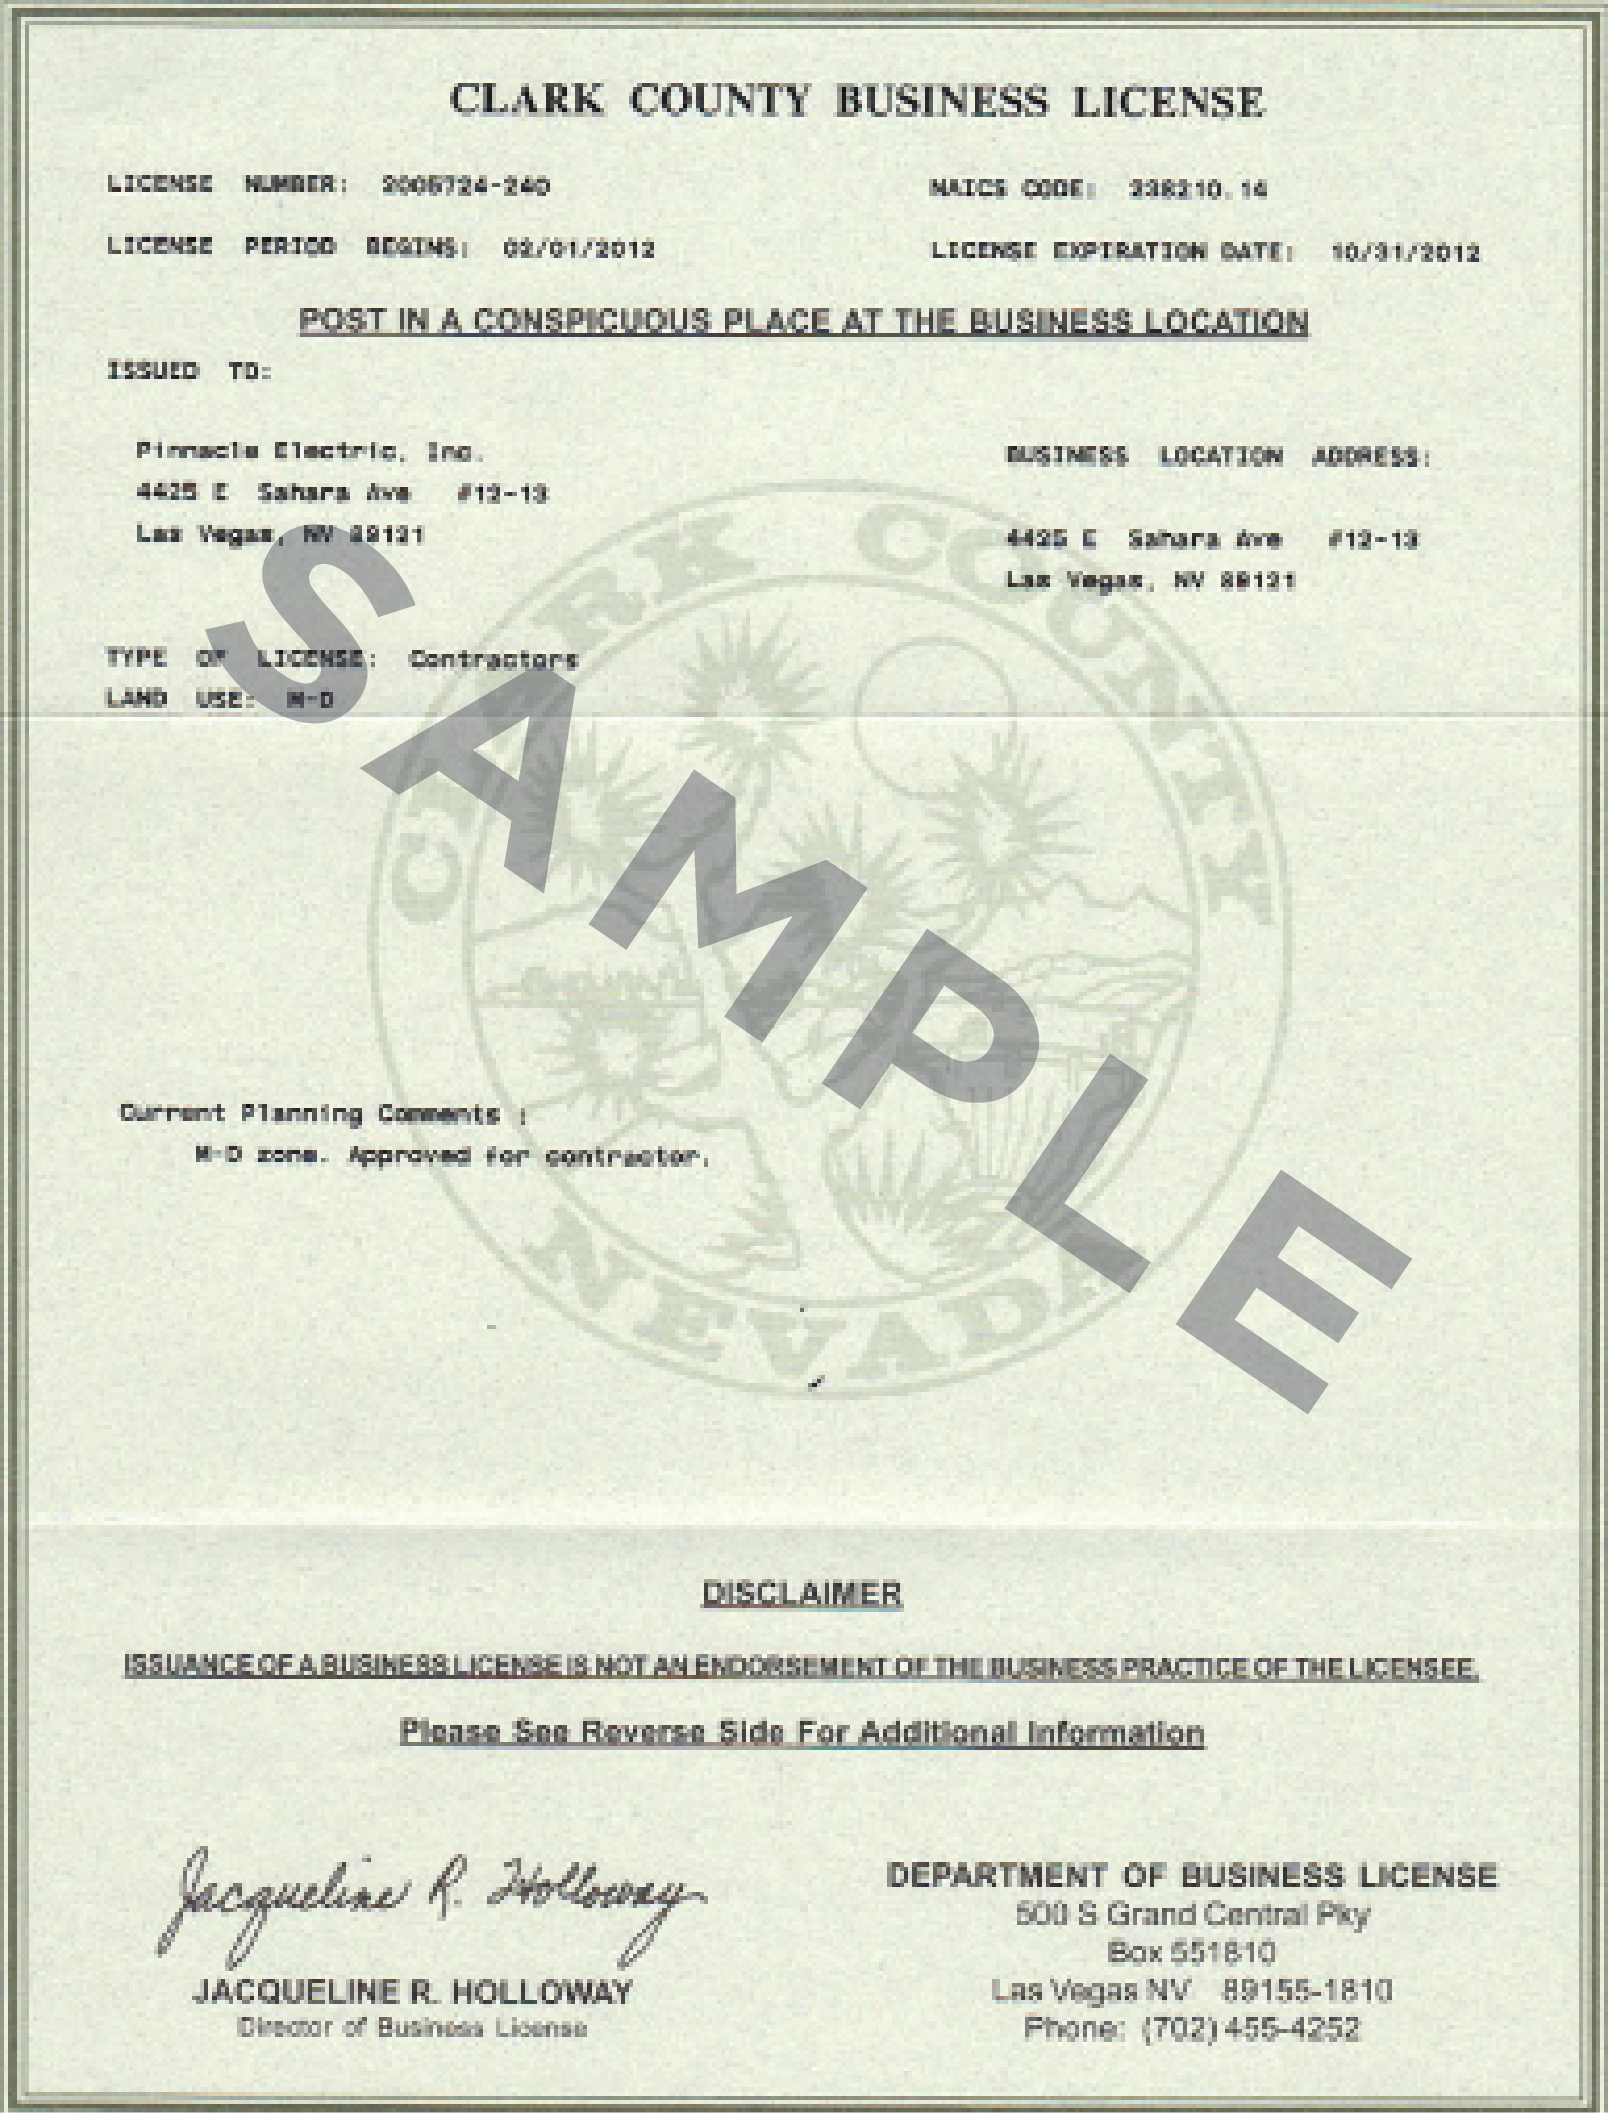 This image shows an example of a Clark County Business License